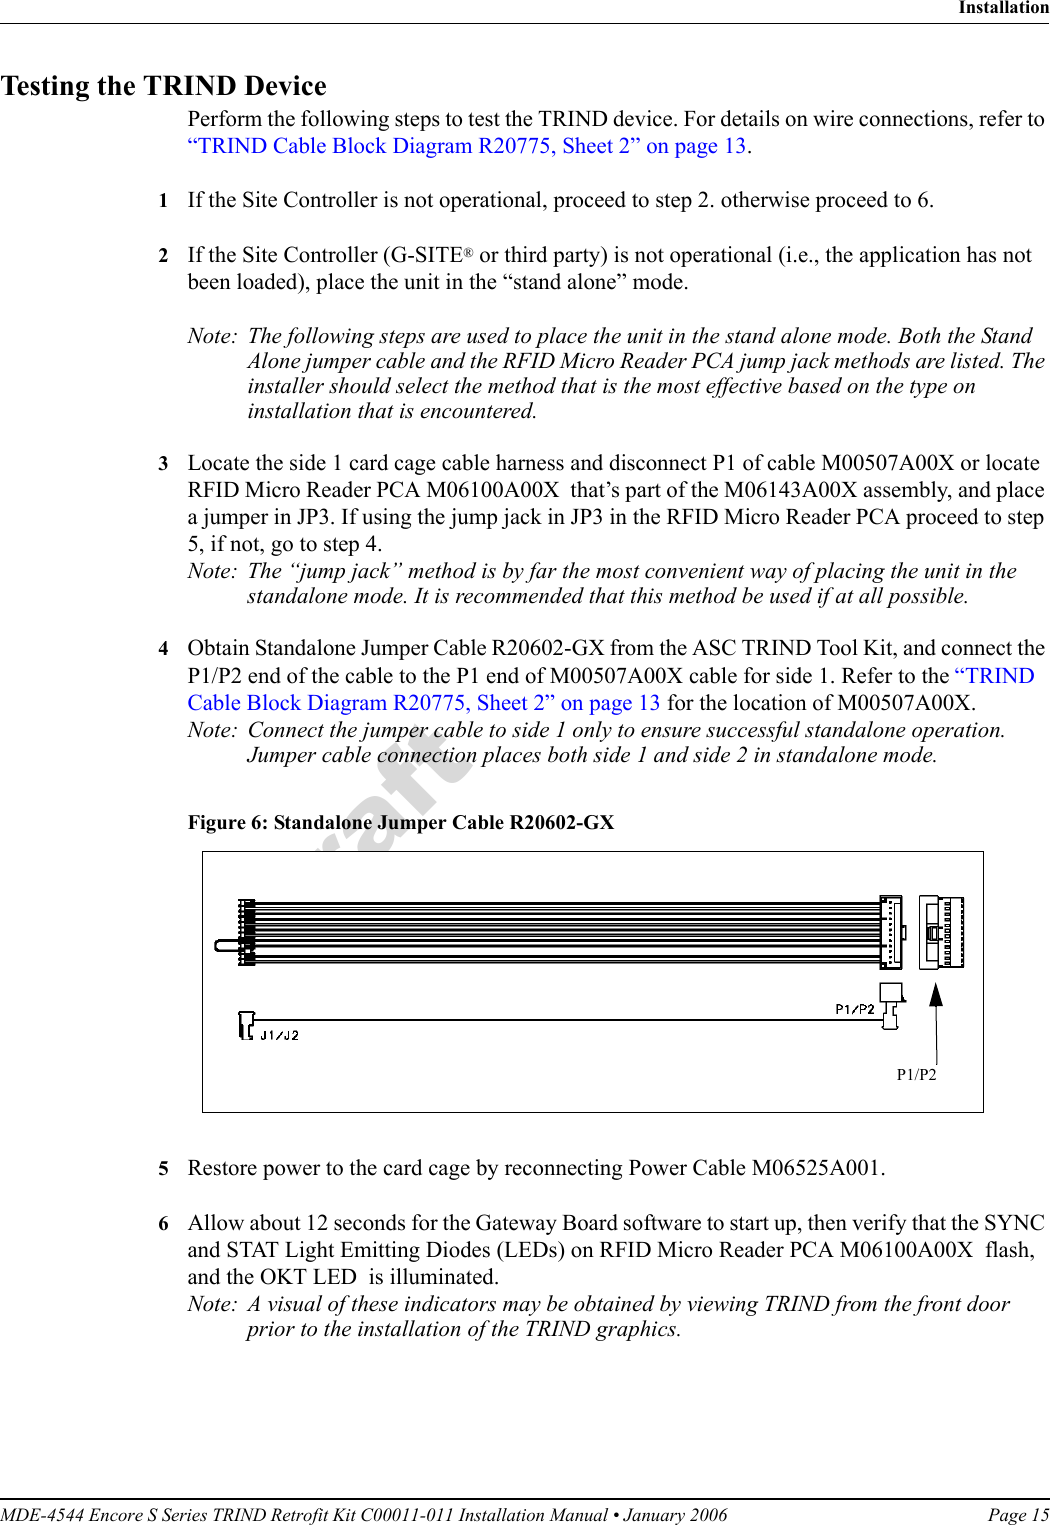 MDE-4544 Encore S Series TRIND Retrofit Kit C00011-011 Installation Manual • January 2006 Page 15InstallationDraftTesting the TRIND DevicePerform the following steps to test the TRIND device. For details on wire connections, refer to “TRIND Cable Block Diagram R20775, Sheet 2” on page 13.1If the Site Controller is not operational, proceed to step 2. otherwise proceed to 6.2If the Site Controller (G-SITE® or third party) is not operational (i.e., the application has not been loaded), place the unit in the “stand alone” mode.Note: The following steps are used to place the unit in the stand alone mode. Both the Stand Alone jumper cable and the RFID Micro Reader PCA jump jack methods are listed. The installer should select the method that is the most effective based on the type on installation that is encountered.3Locate the side 1 card cage cable harness and disconnect P1 of cable M00507A00X or locate RFID Micro Reader PCA M06100A00X  that’s part of the M06143A00X assembly, and place a jumper in JP3. If using the jump jack in JP3 in the RFID Micro Reader PCA proceed to step 5, if not, go to step 4.Note: The “jump jack” method is by far the most convenient way of placing the unit in the standalone mode. It is recommended that this method be used if at all possible.4Obtain Standalone Jumper Cable R20602-GX from the ASC TRIND Tool Kit, and connect the P1/P2 end of the cable to the P1 end of M00507A00X cable for side 1. Refer to the “TRIND Cable Block Diagram R20775, Sheet 2” on page 13 for the location of M00507A00X.Note: Connect the jumper cable to side 1 only to ensure successful standalone operation. Jumper cable connection places both side 1 and side 2 in standalone mode.Figure 6: Standalone Jumper Cable R20602-GX P1/P2 5Restore power to the card cage by reconnecting Power Cable M06525A001. 6Allow about 12 seconds for the Gateway Board software to start up, then verify that the SYNC and STAT Light Emitting Diodes (LEDs) on RFID Micro Reader PCA M06100A00X  flash, and the OKT LED  is illuminated.Note: A visual of these indicators may be obtained by viewing TRIND from the front door prior to the installation of the TRIND graphics.